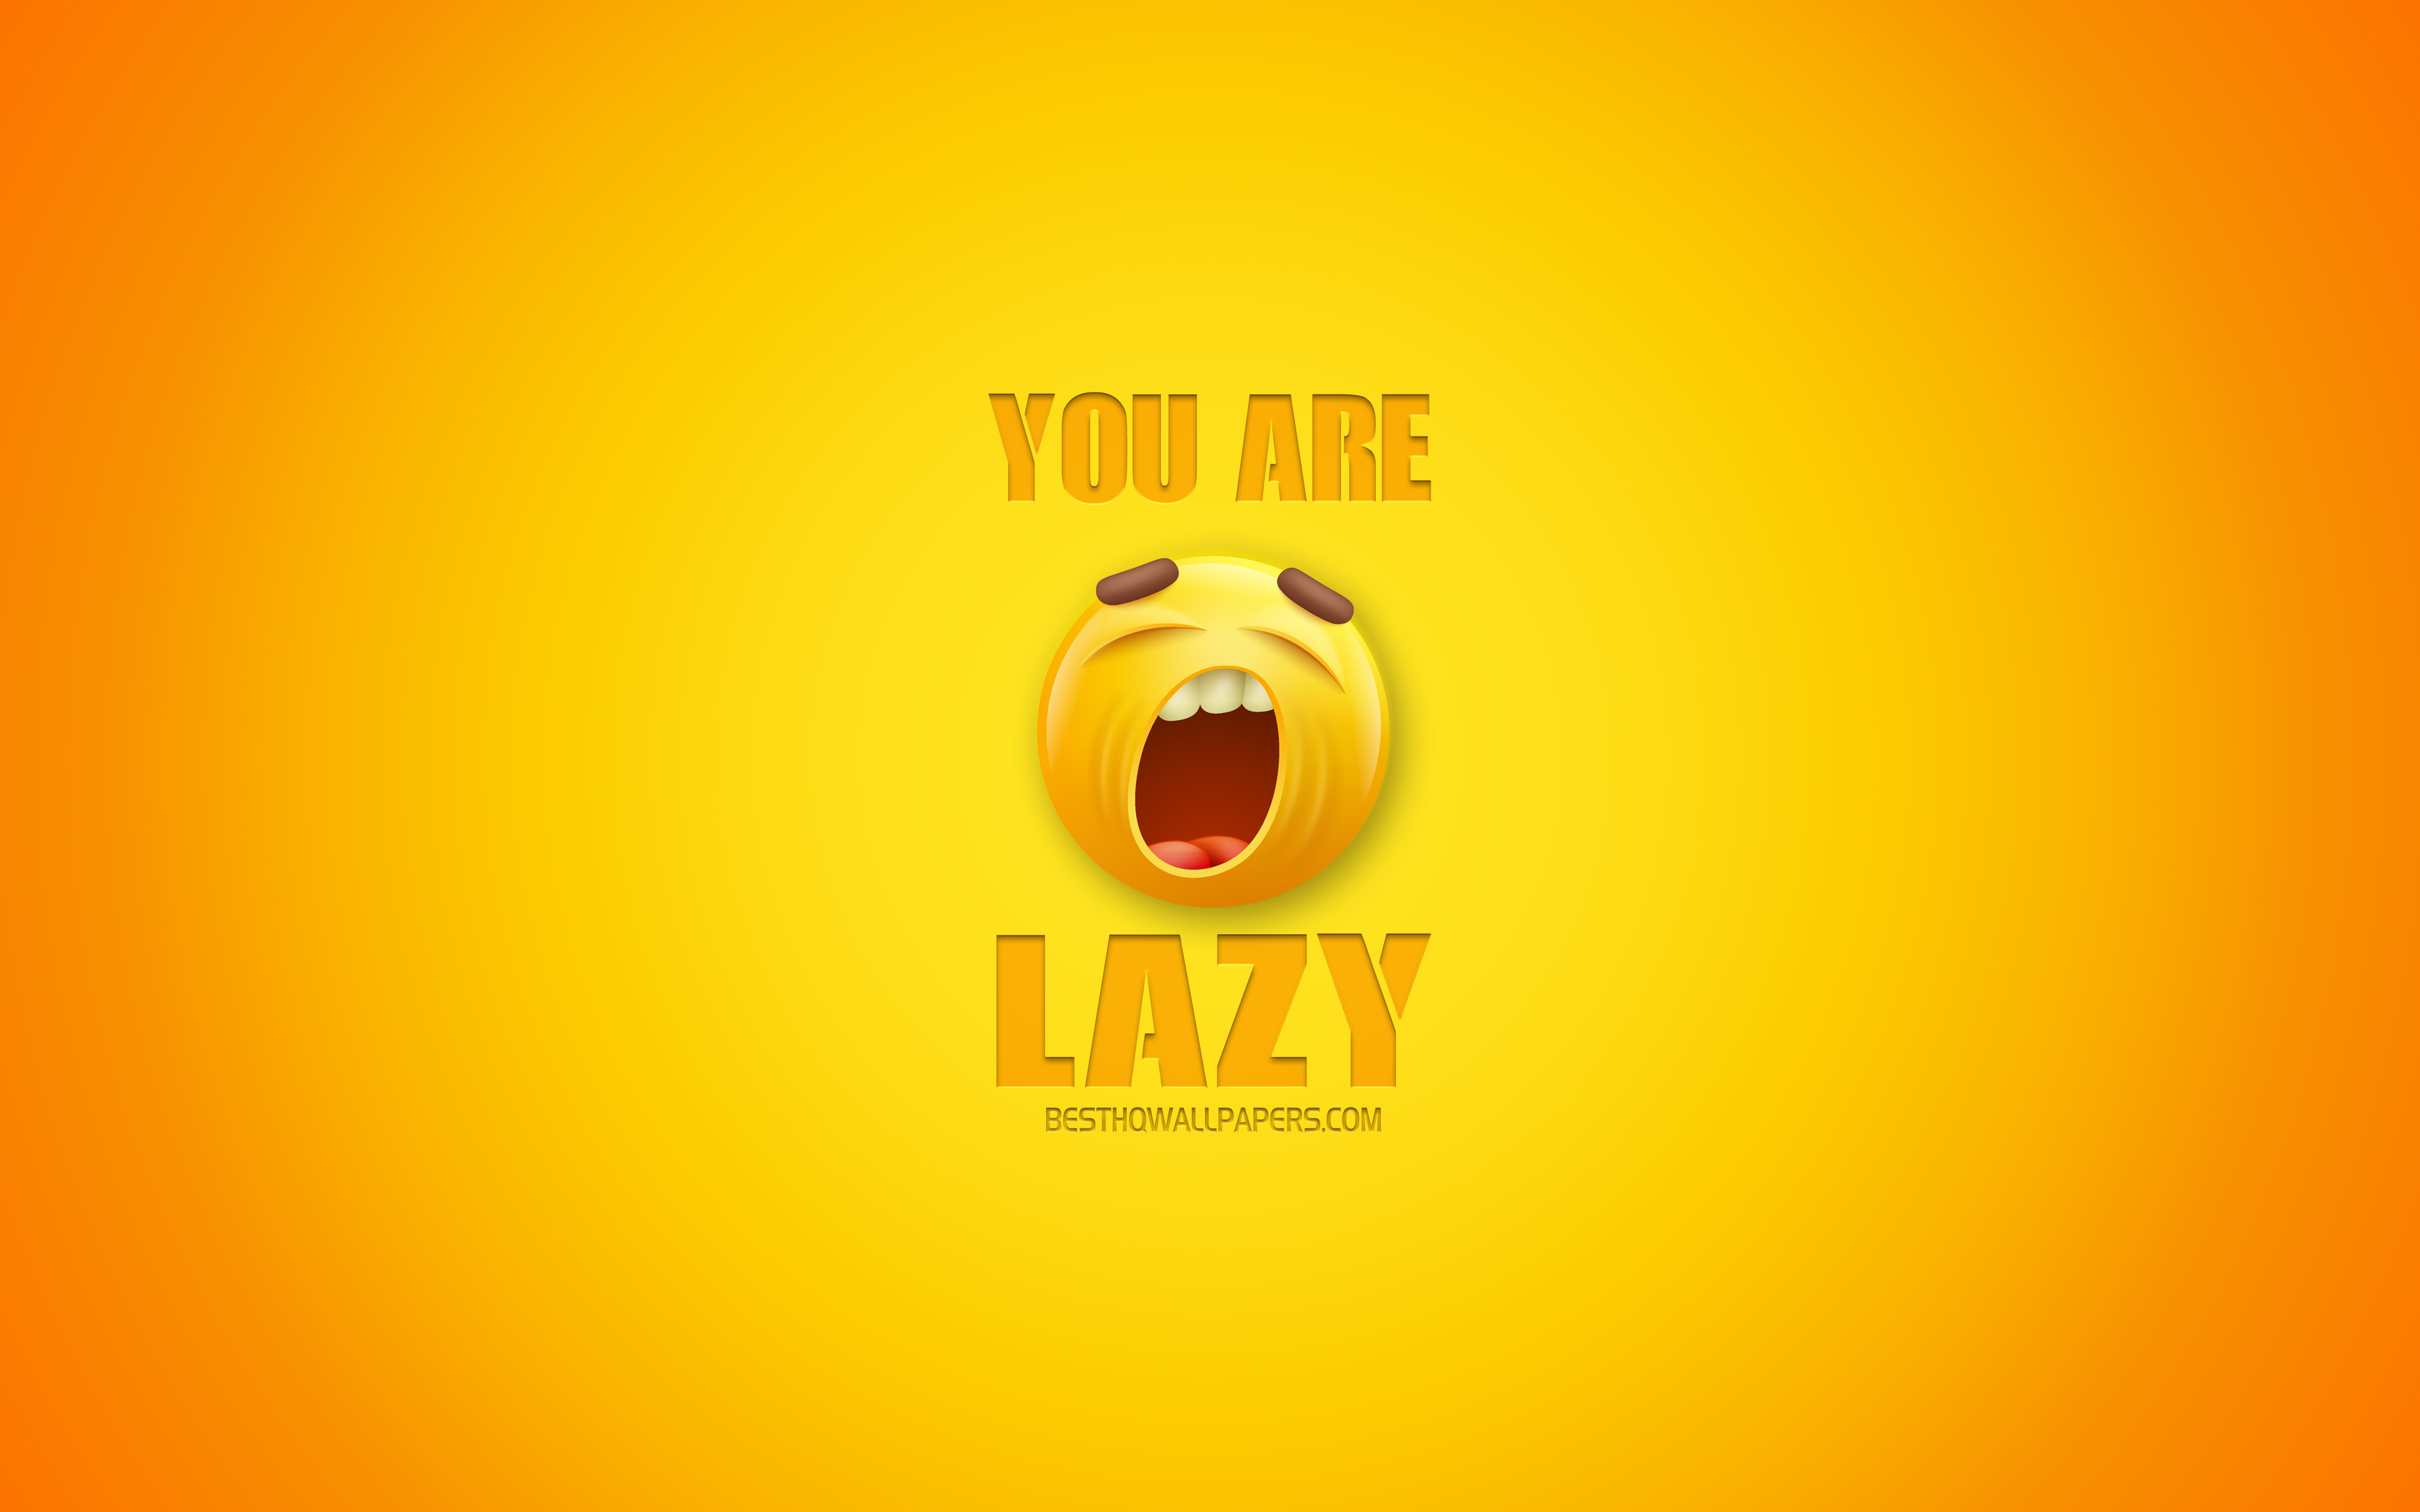 Download wallpaper You are lazy, funny art, yellow background, 3D art, laziness concepts for desktop with resolution 3840x2400. High Quality HD picture wallpaper